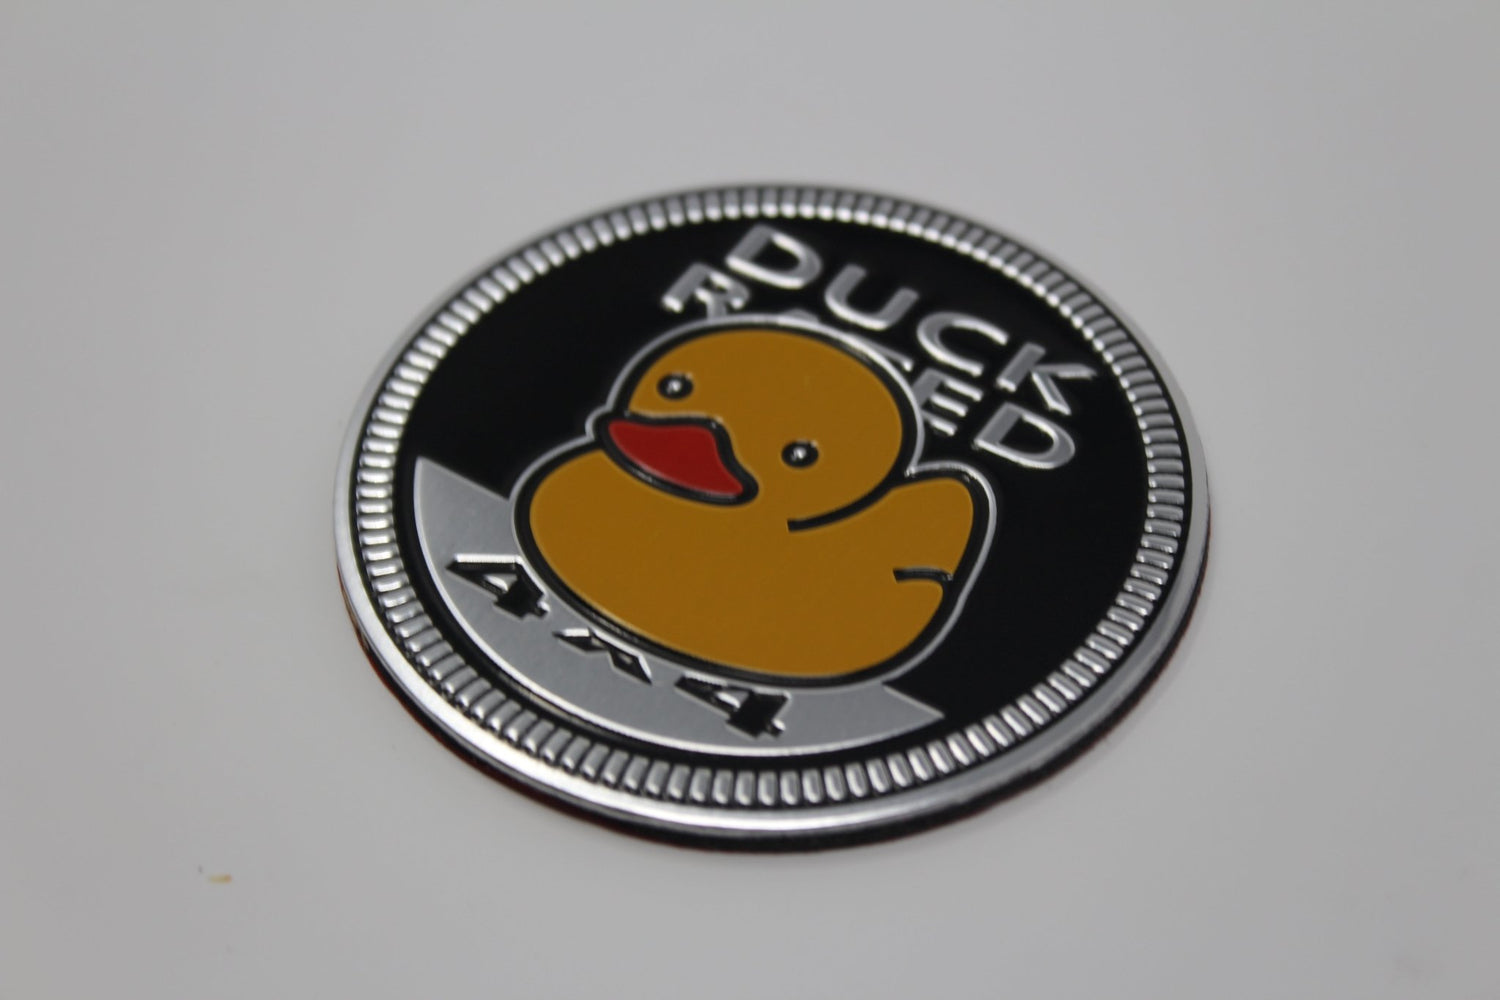 Duck Rated Jeep 4x4 3D Aluminum Badge - Jeep Vehicle Decor Accessory Sets